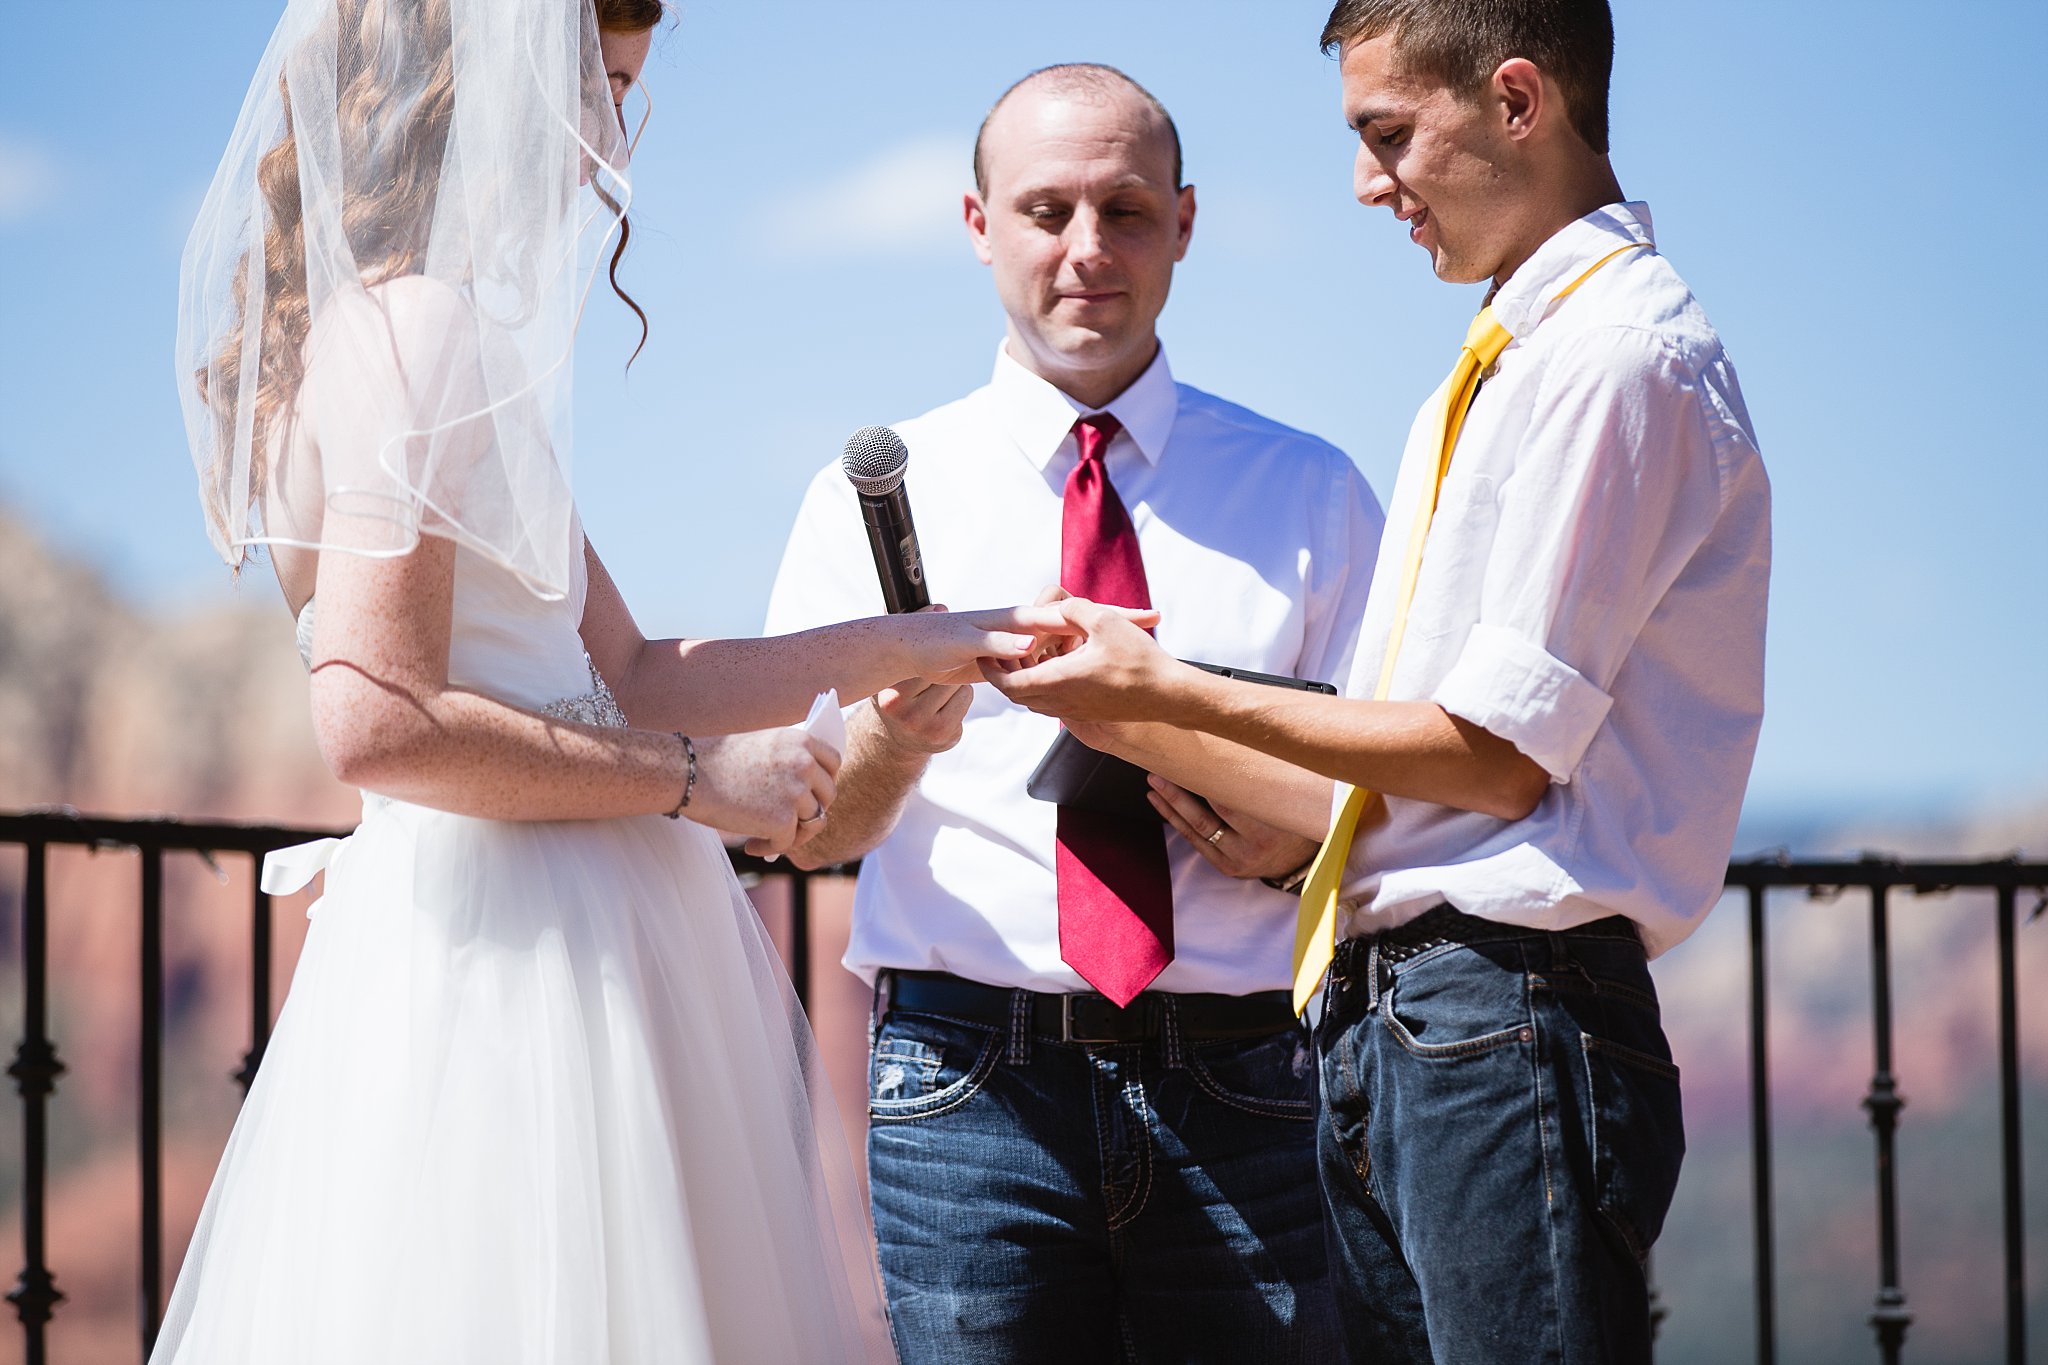 Bride and groom exchange rings during their wedding ceremony at Sky Ranch Lodge by Arizona wedding photographer PMA Photography.